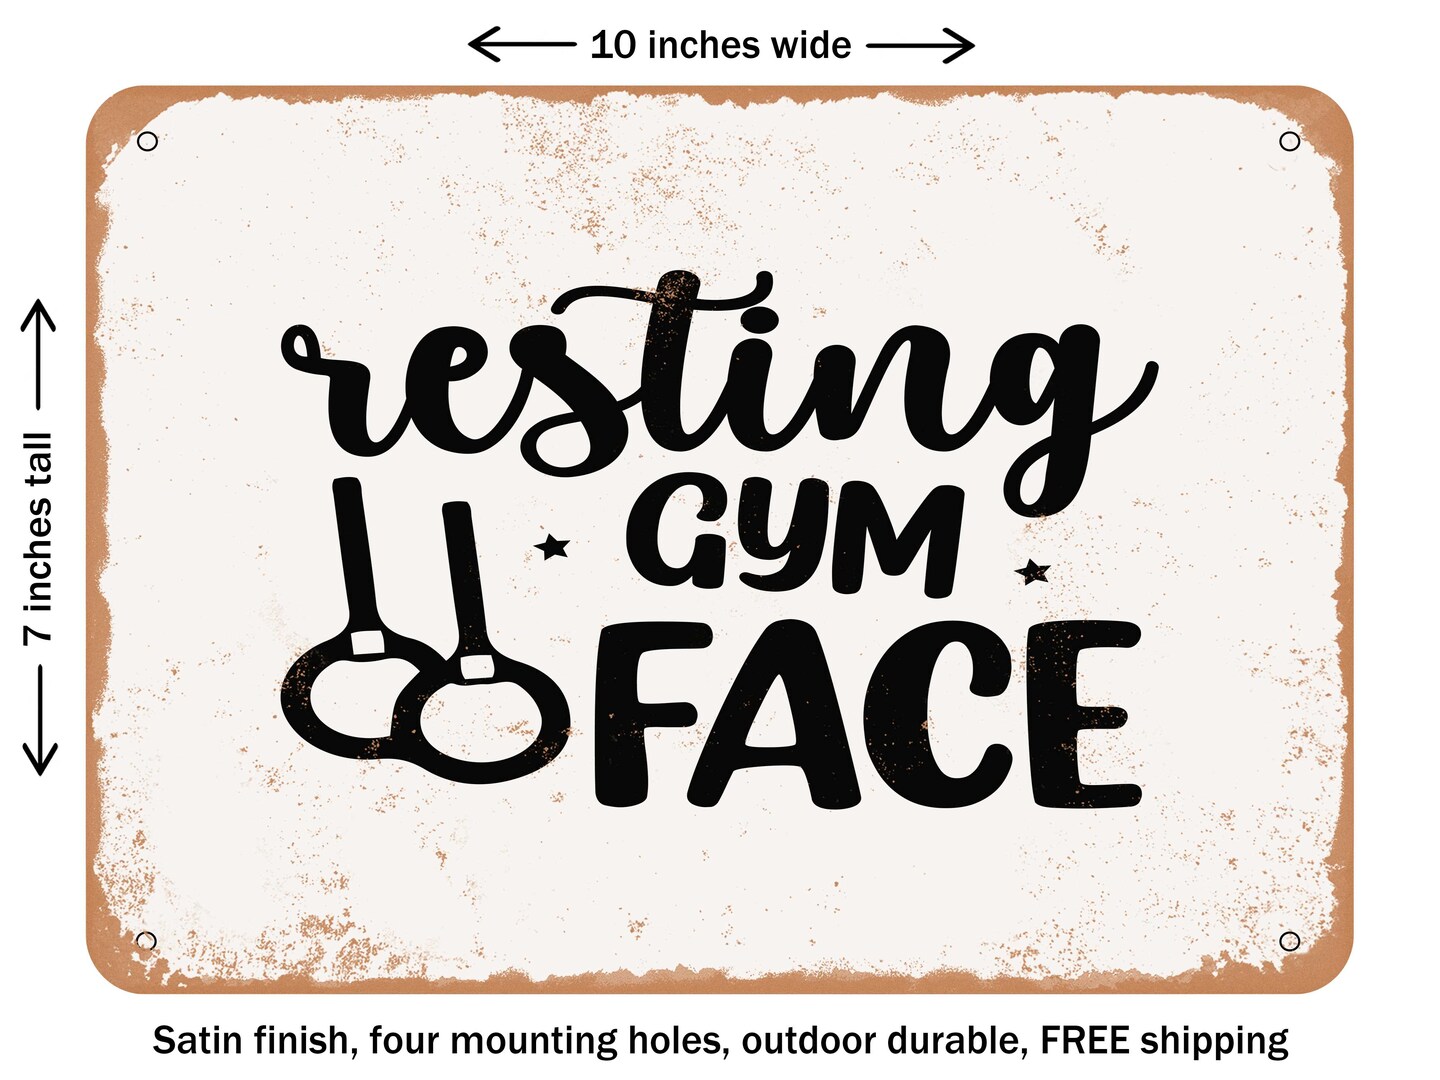 DECORATIVE METAL SIGN - Resting Gym Face - 4 - Vintage Rusty Look